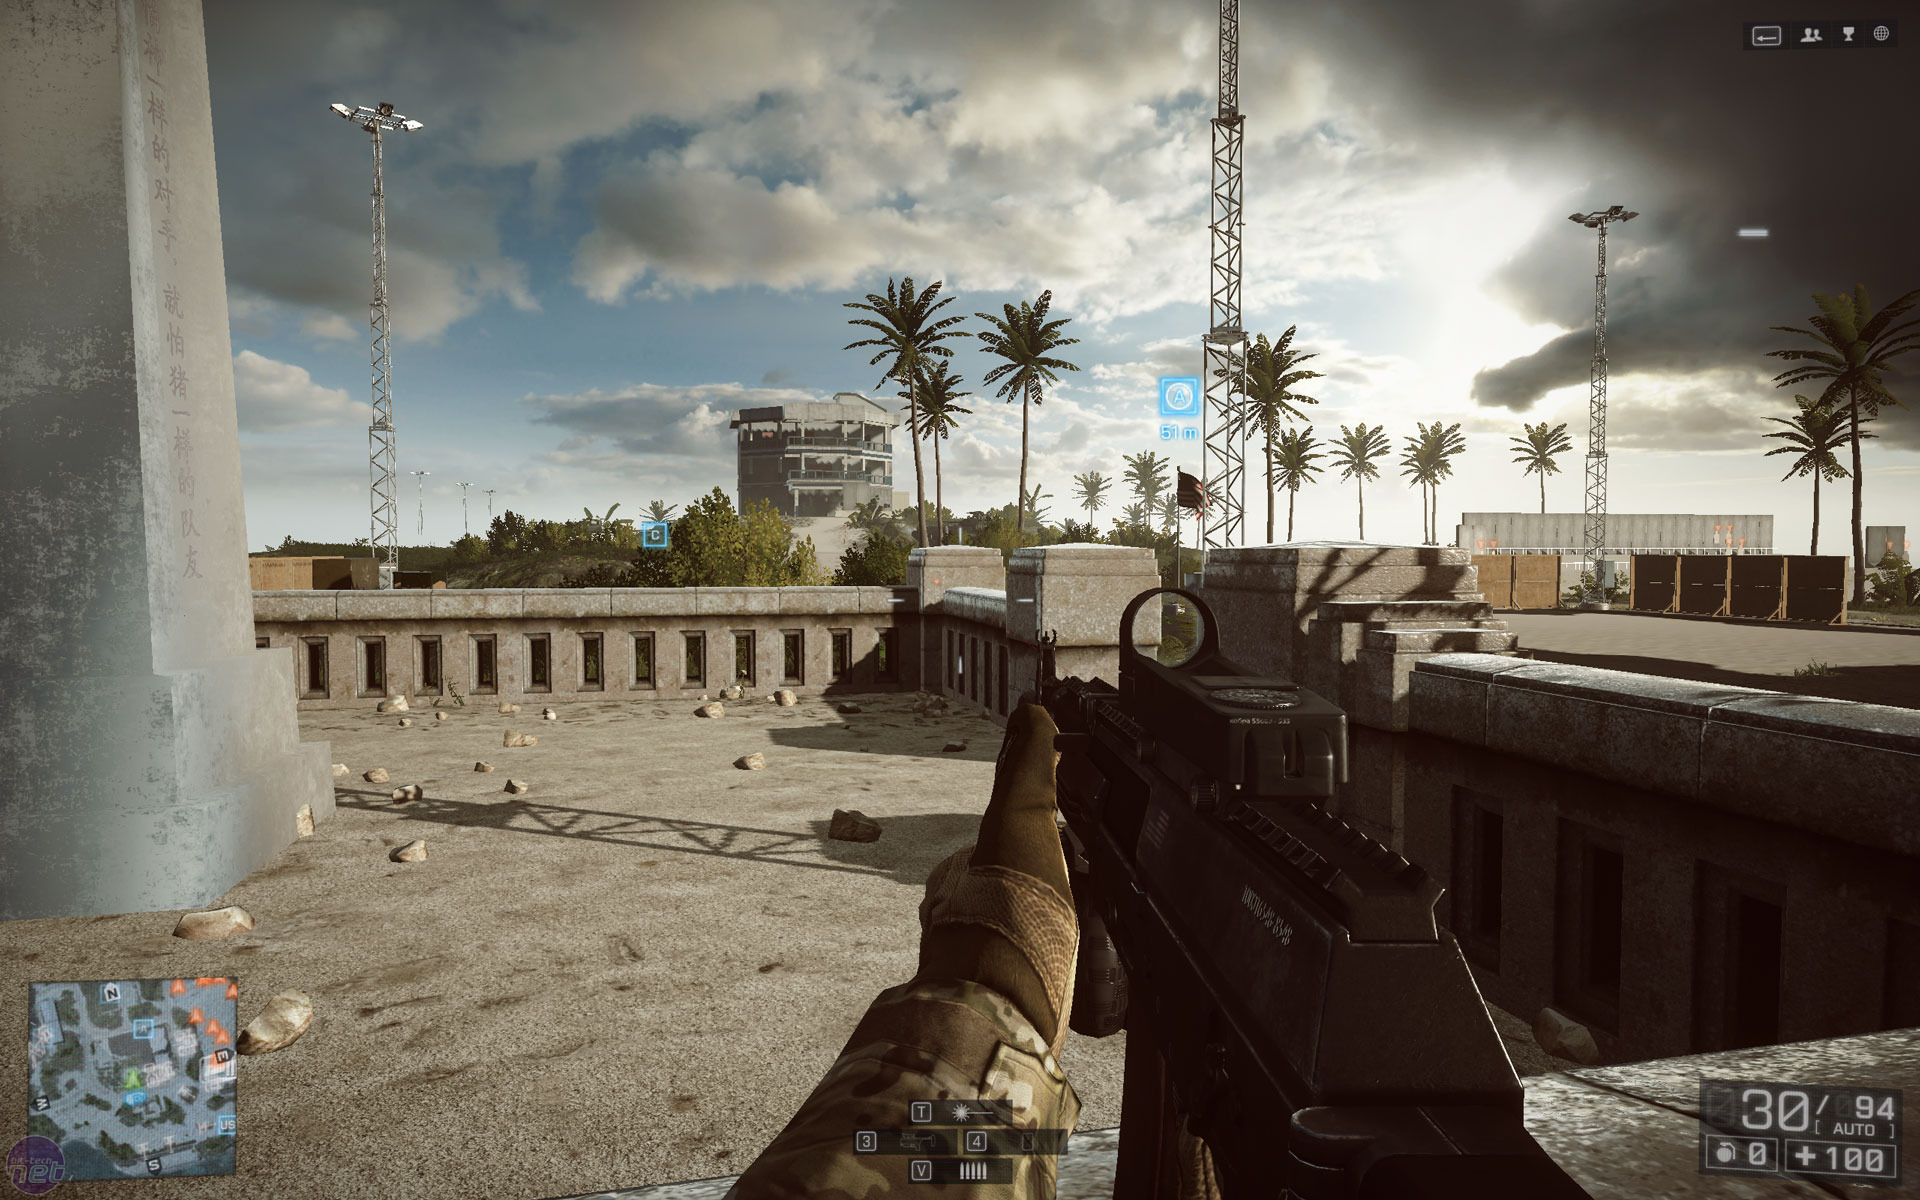 Battlefield 4 Benchmarked -  Reviews